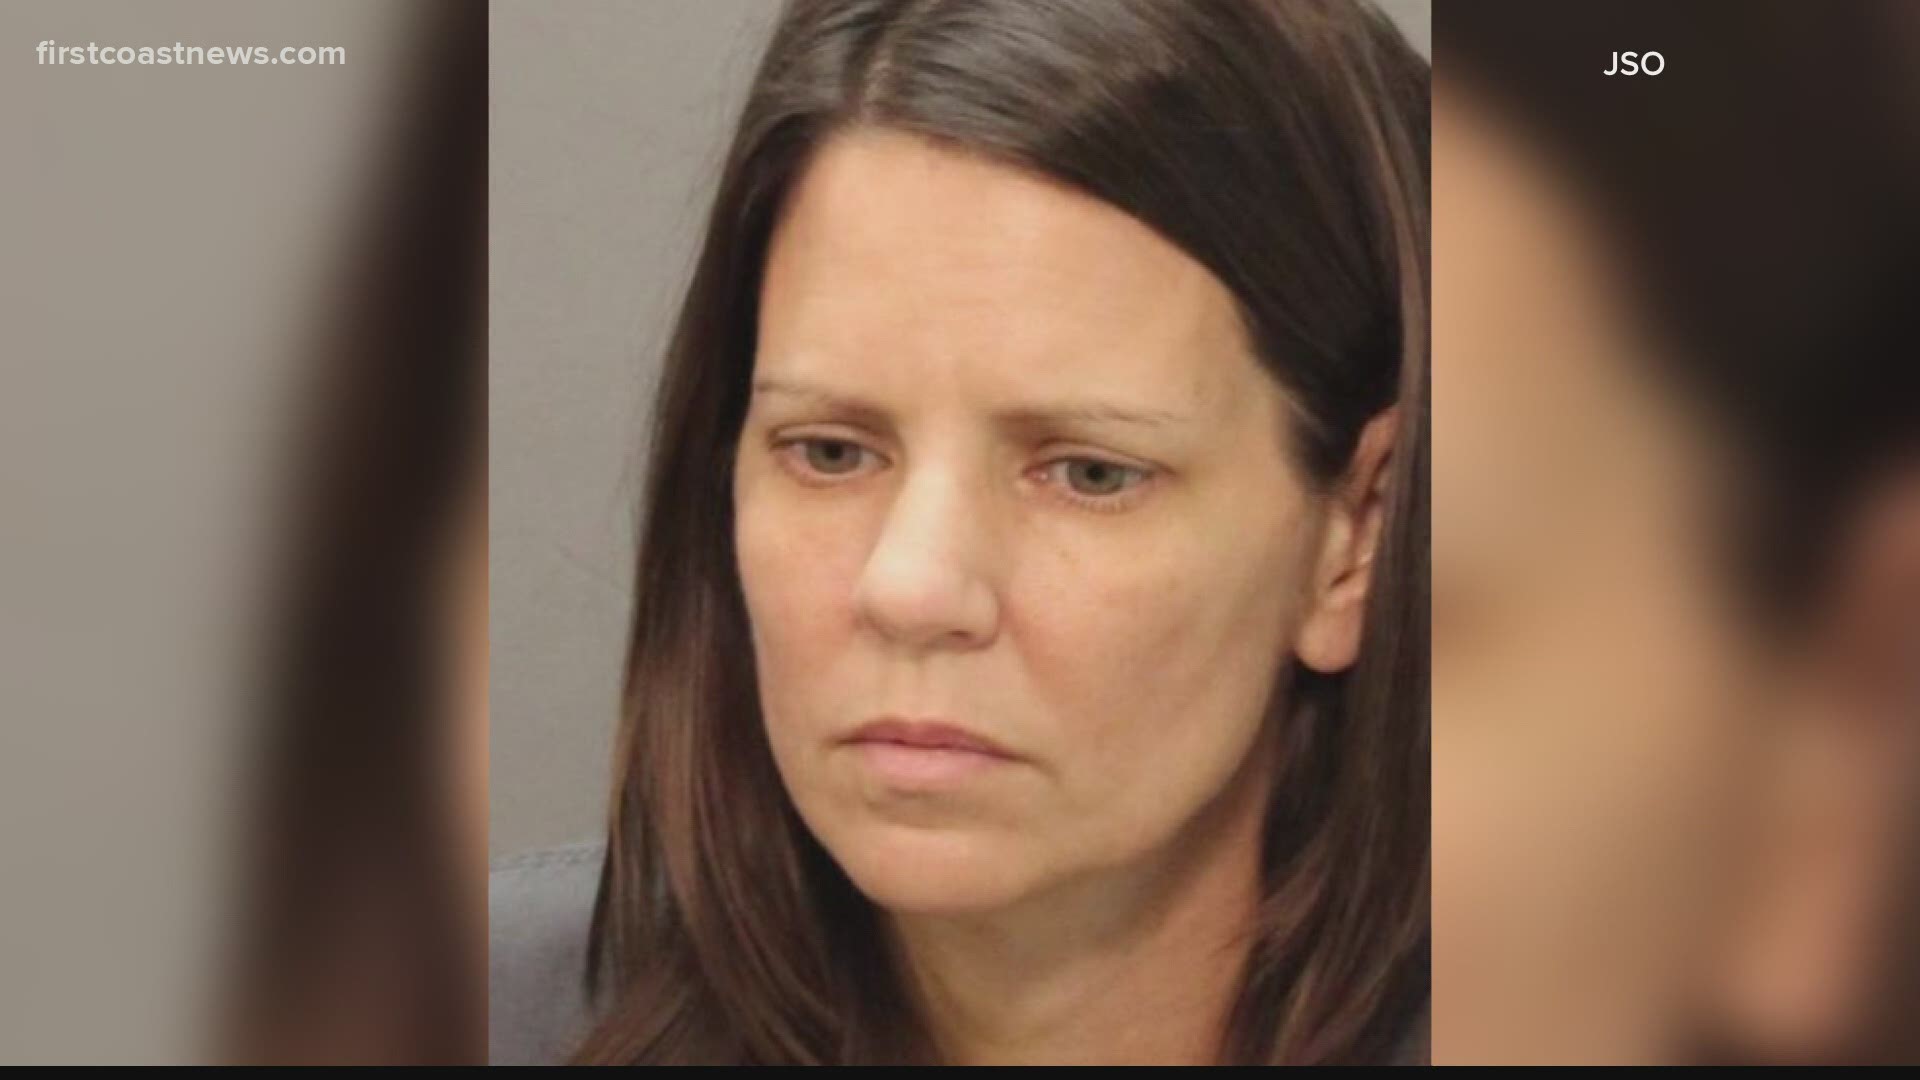 According to the arrest report, the boy's father found him not breathing and said his mother, Amy Oliver, "tried to kill" the child.